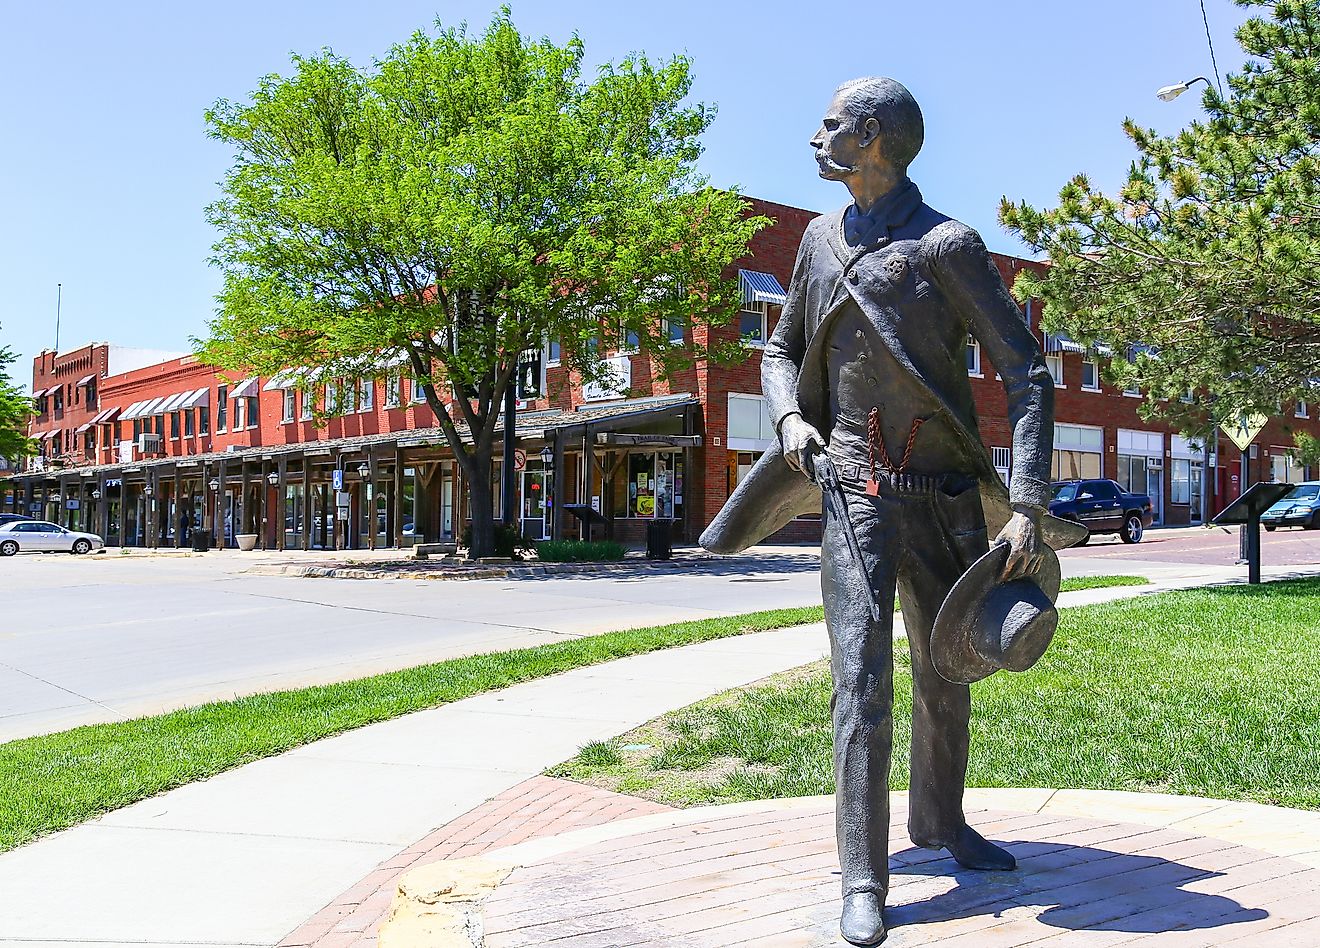 Bronze sculpture of Wyatt Earp as part of the Trail of Fame in the historic district of the city. Editorial credit: Michael Rosebrock / Shutterstock.com